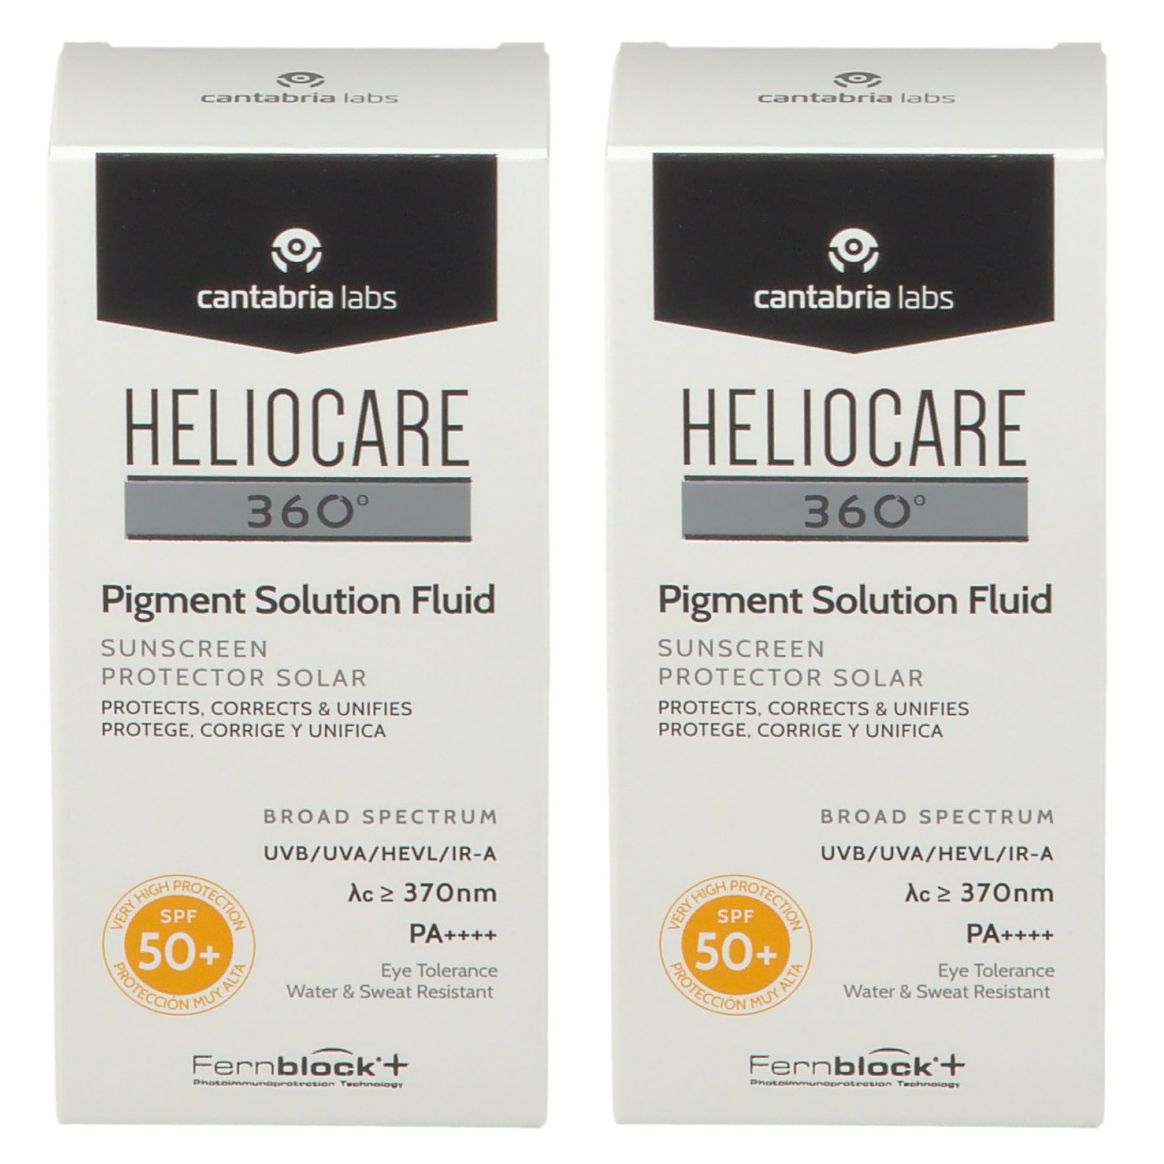 Image of HELIOCARE 360° Pigment Solution Fluid SPF 50+